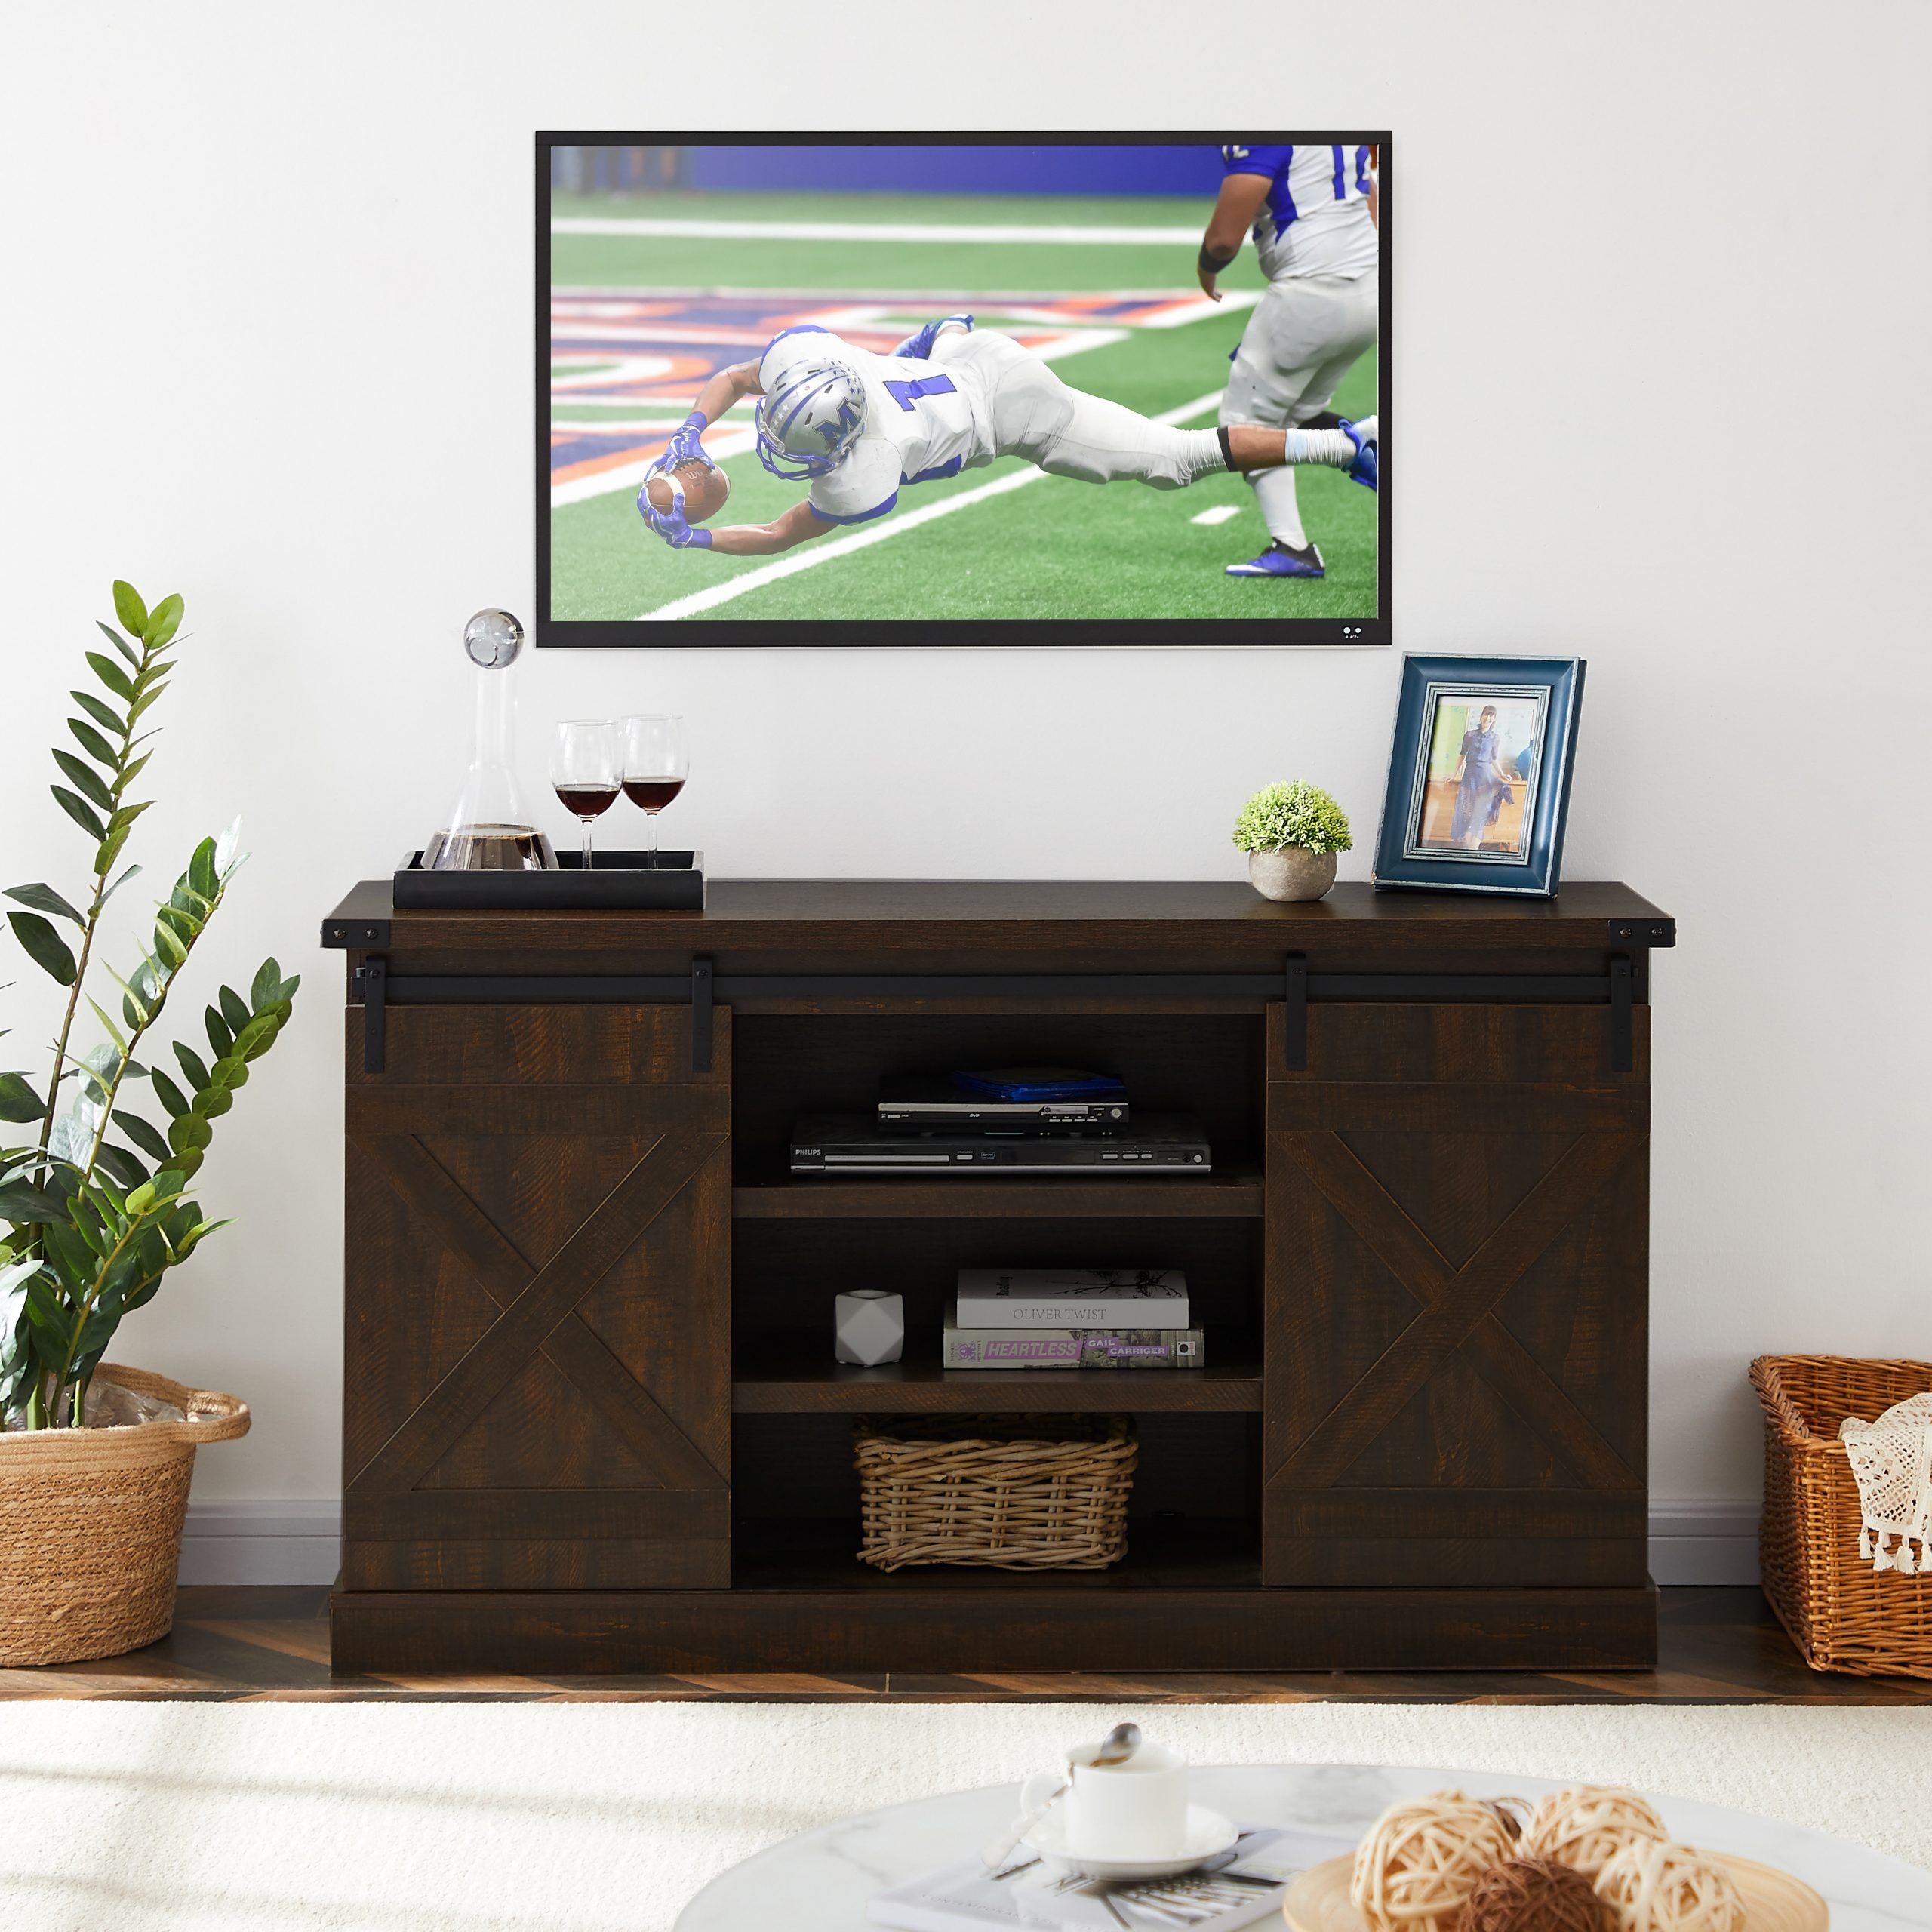 Tv Stand For 40 65 Inch Tv, Modern Farmhouse Tv Stand With Inside 40 Inch Corner Tv Stands (View 1 of 15)